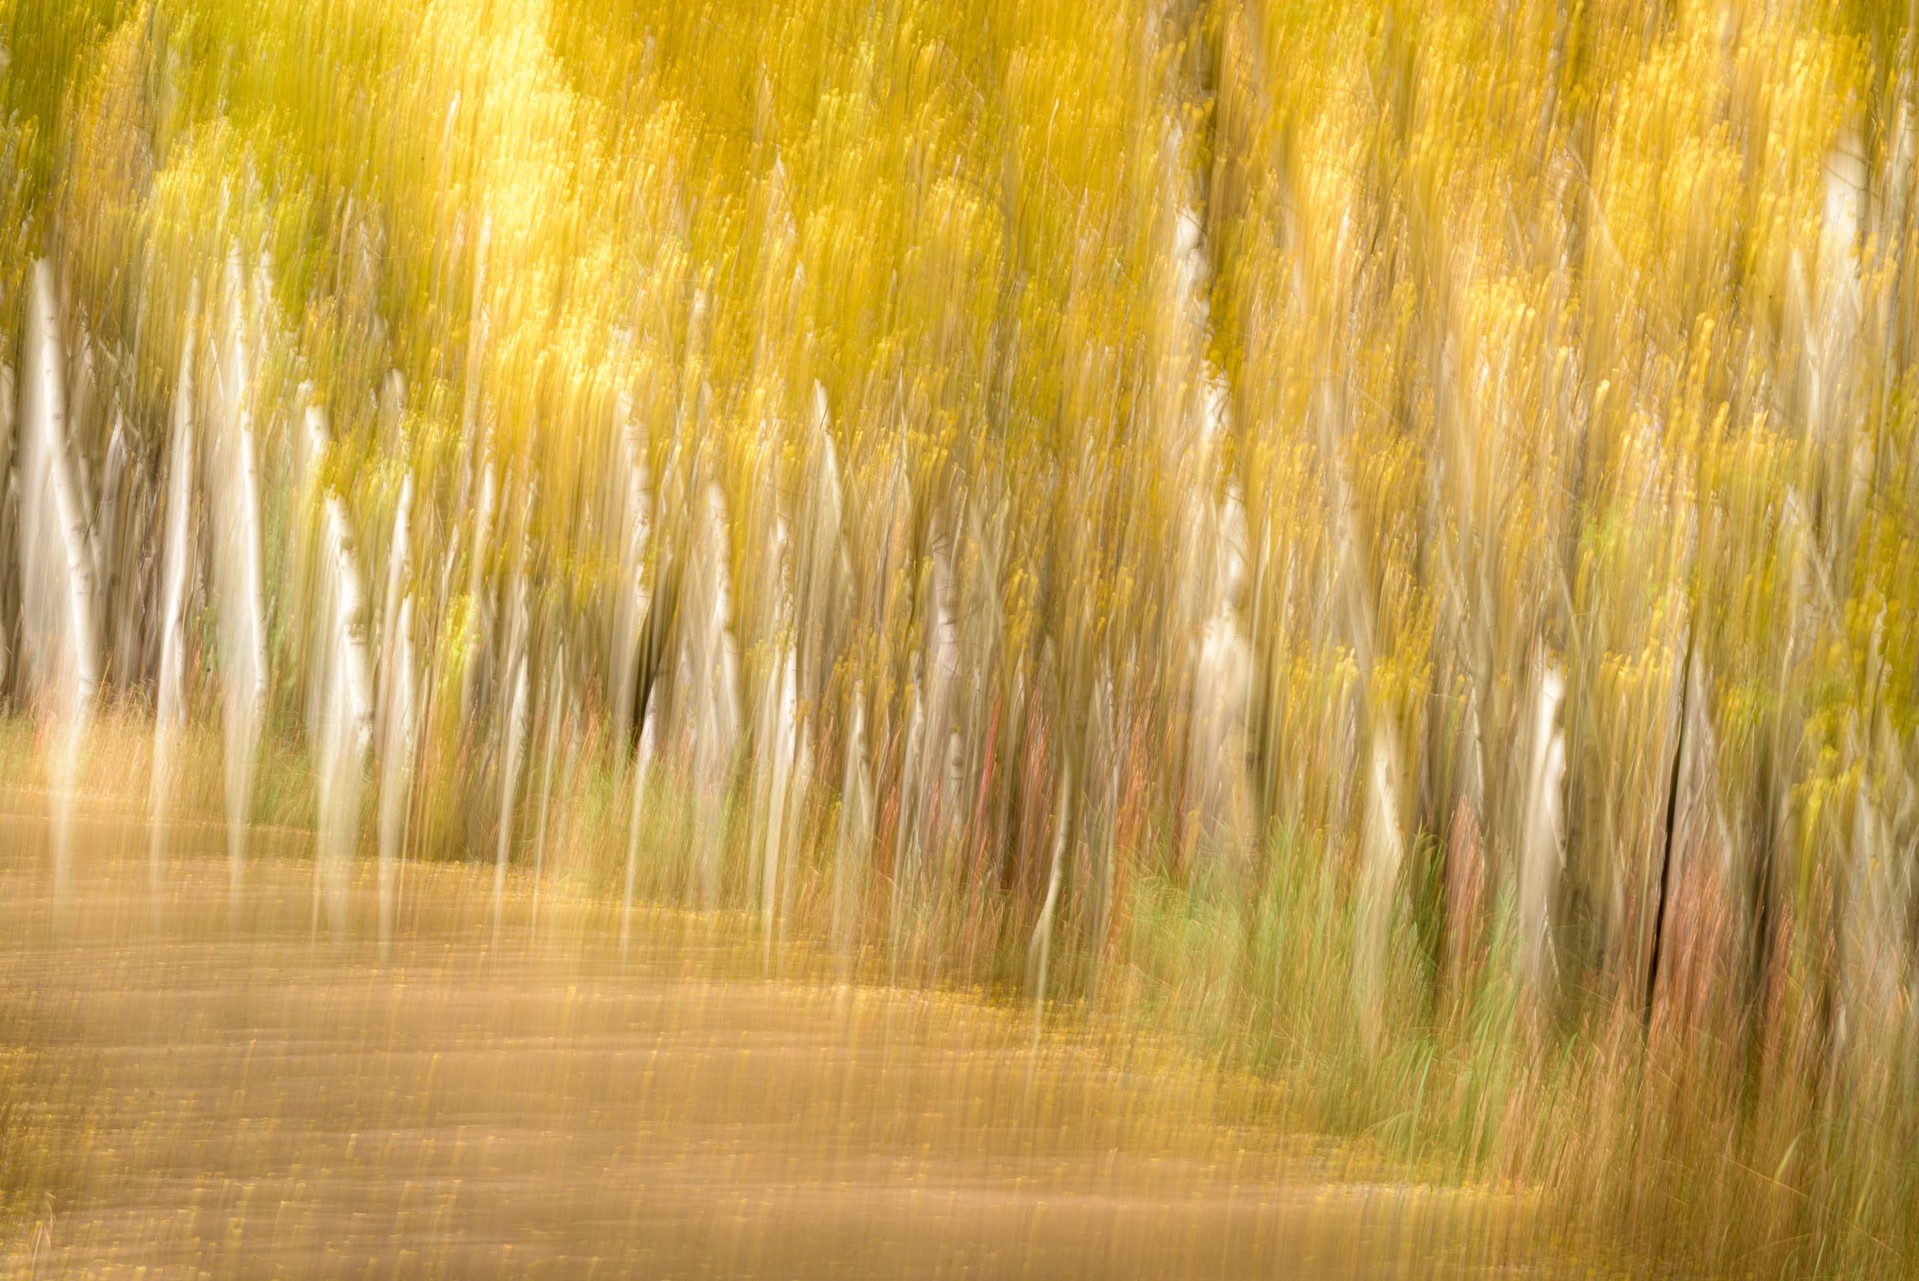 Light Rays Through Yellow And Orange Fall Aspen Trees On A Country Road, Abstract Photography Printed On Metal By Dwight Vasel